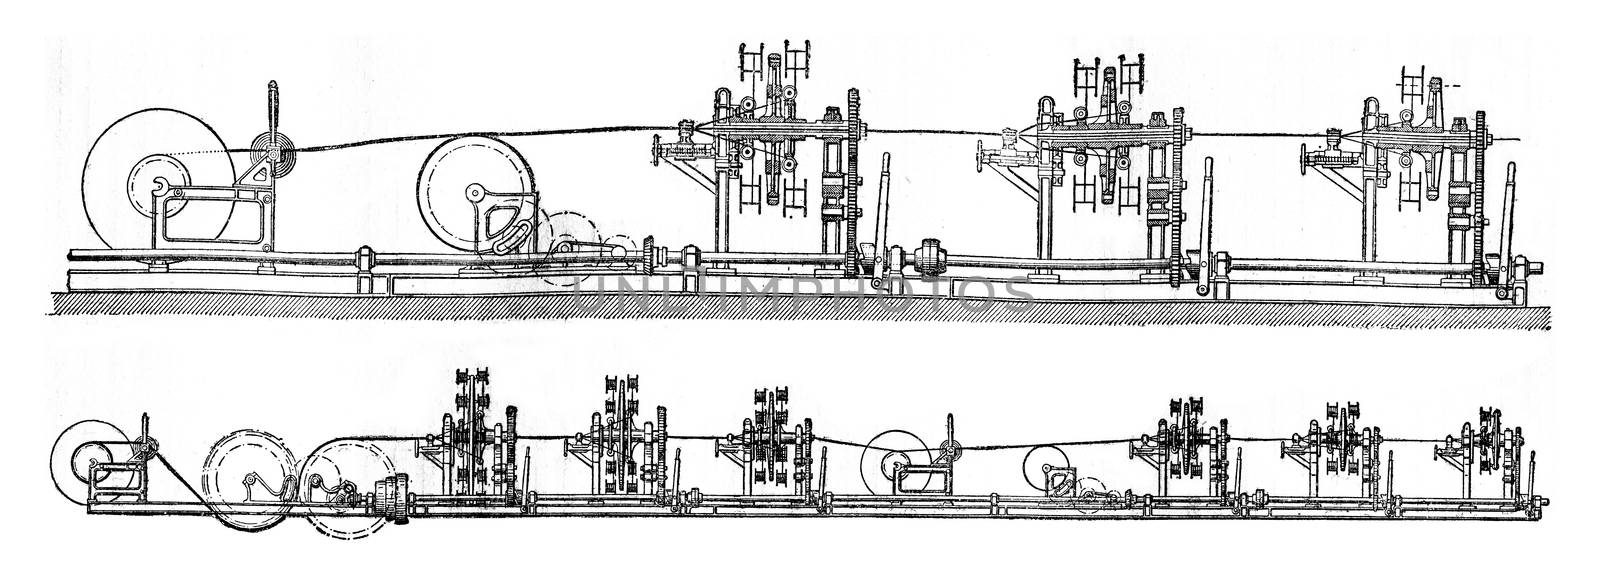 Stranding machine wire 37 and wire 127, vintage engraved illustration. Industrial encyclopedia E.-O. Lami - 1875.
